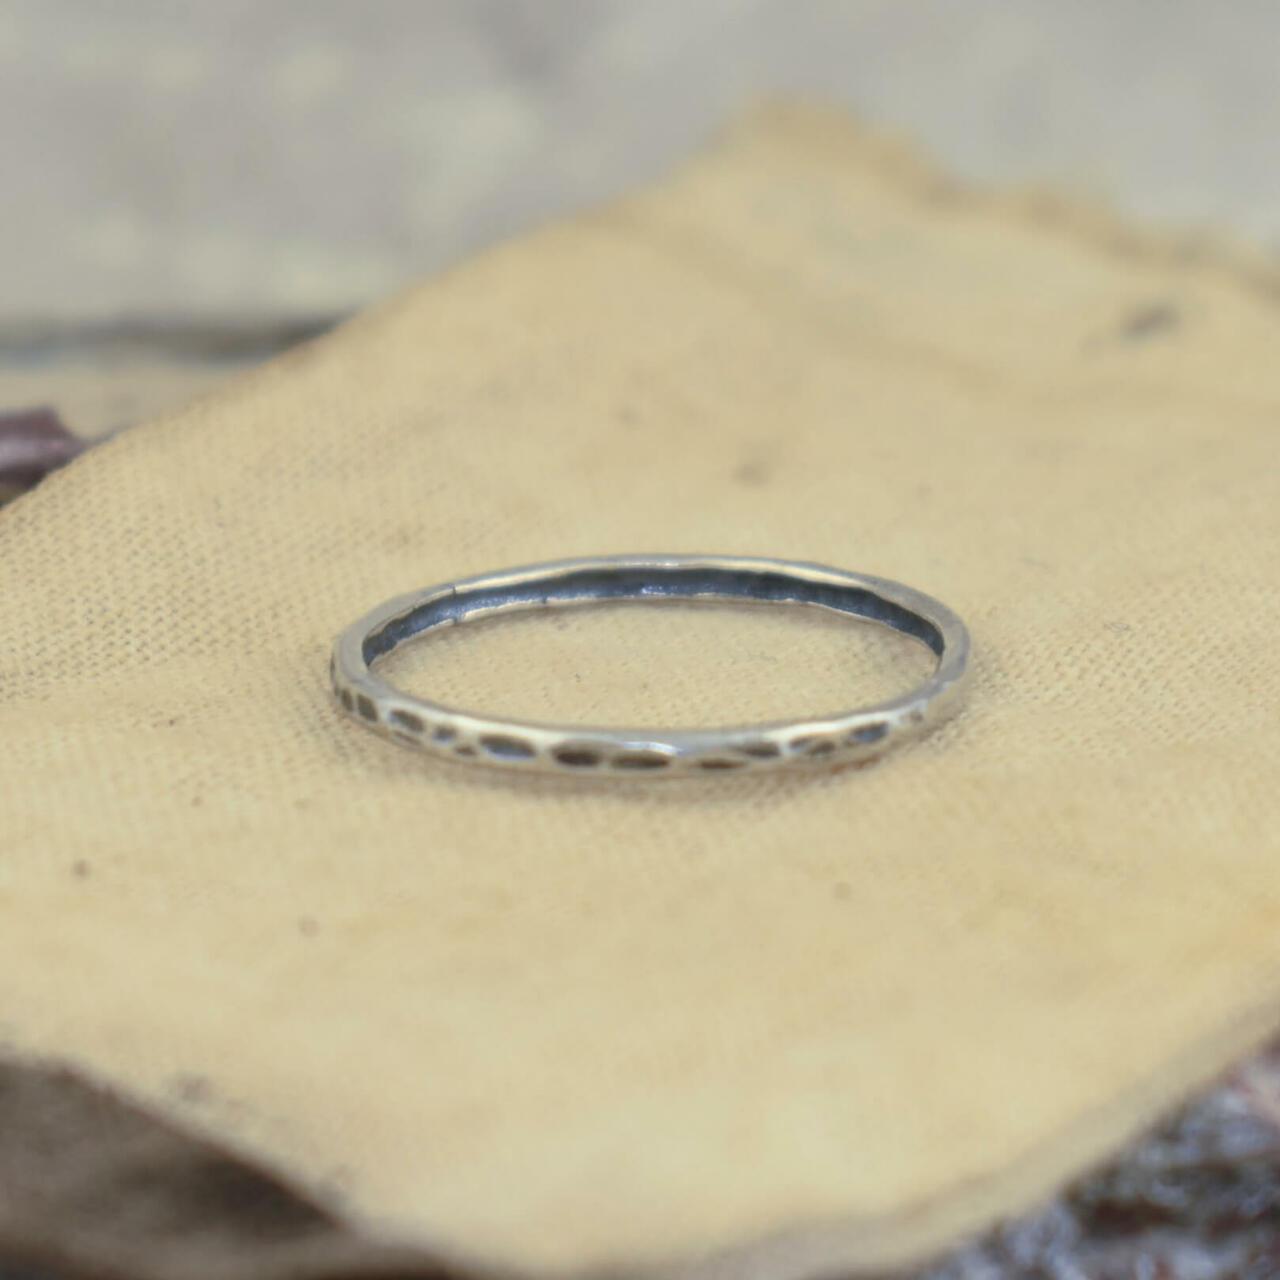 Antiqued sterling silver stack ring